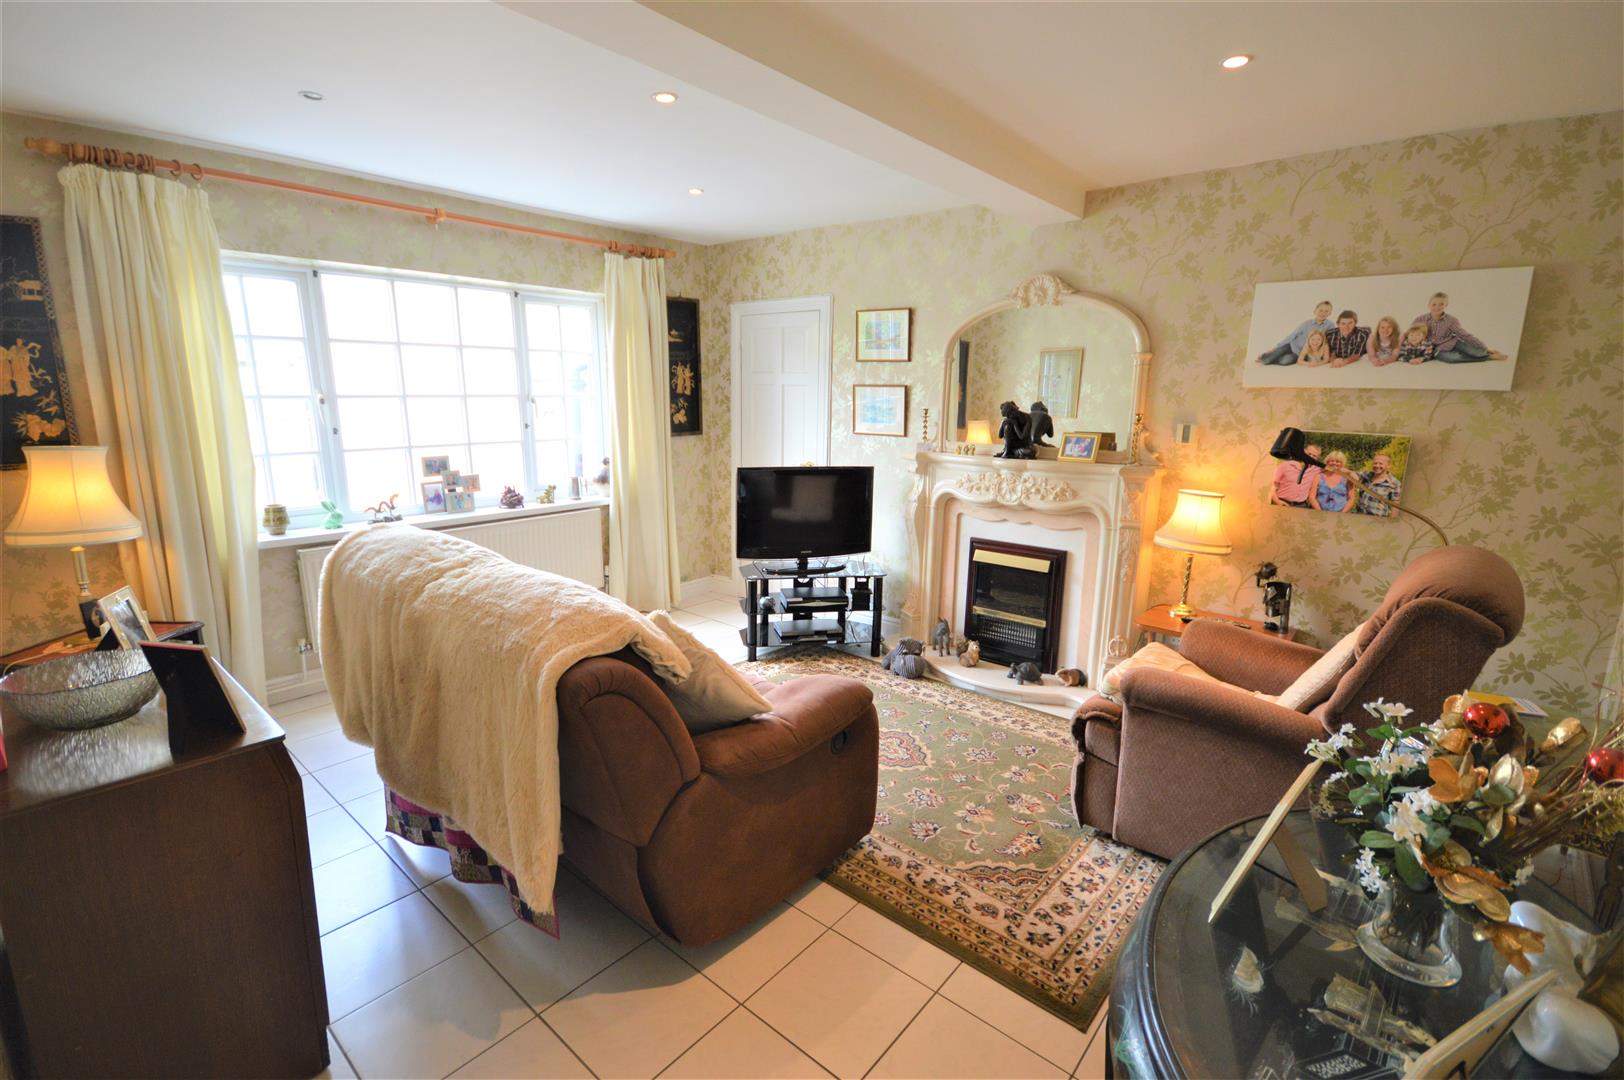 4 bed town house for sale in Leominster 3